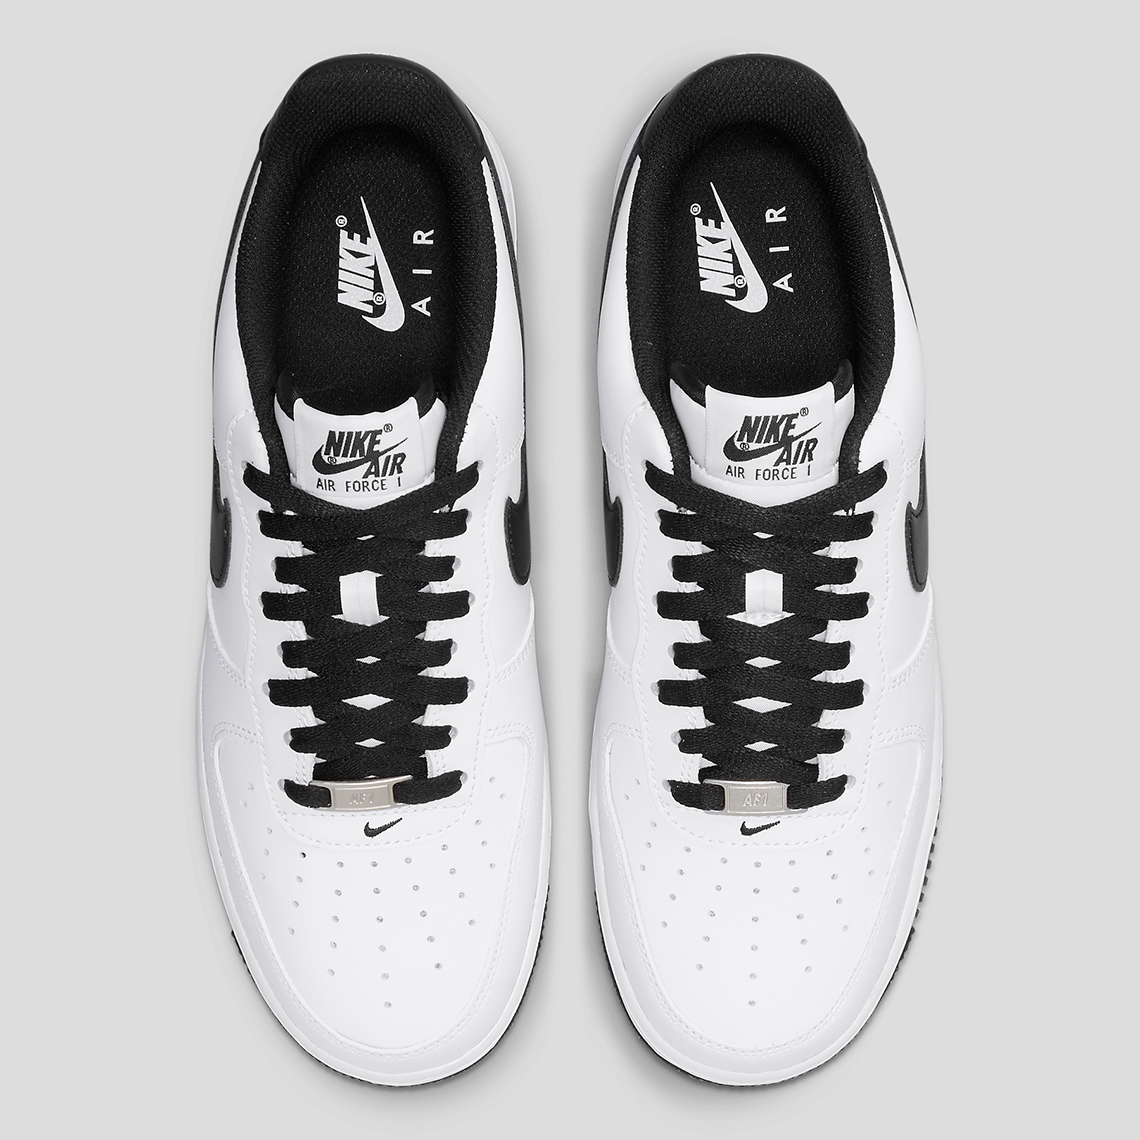 Get The Nike Air Force 1 Force Logo White Black Now •